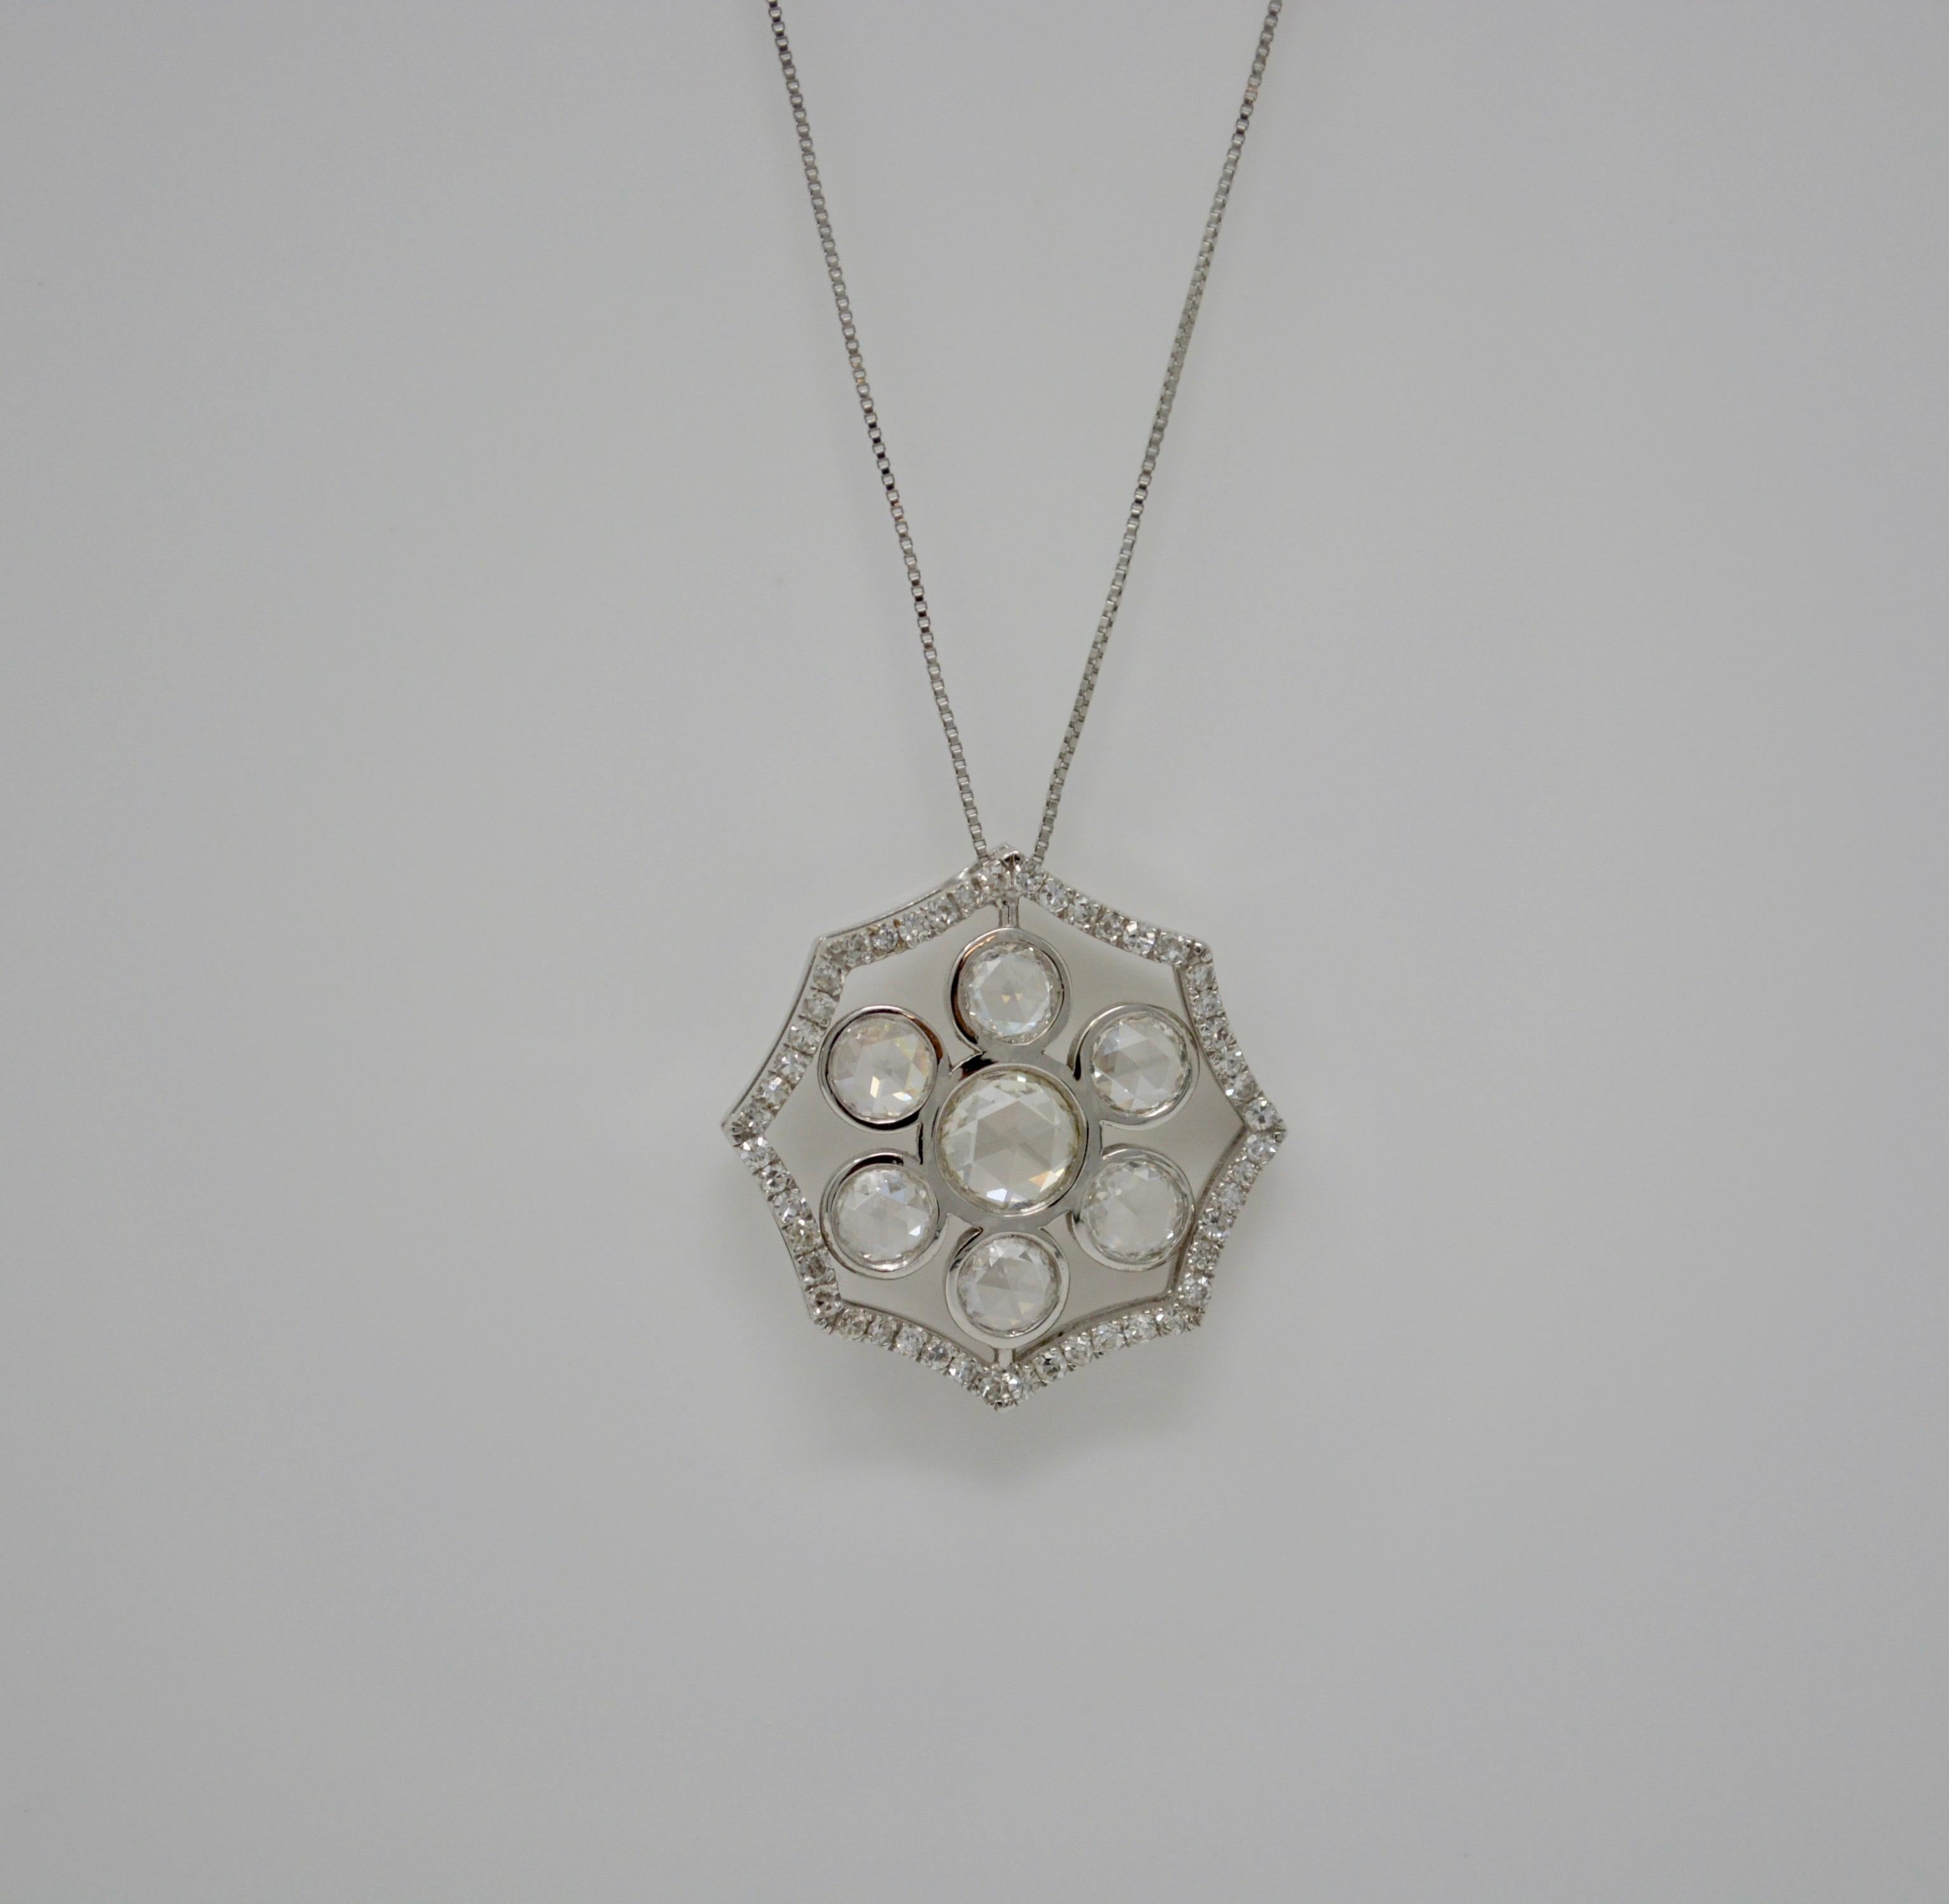 2.51 Carat White Rose Cut Diamond Necklace In 18K White Gold  In New Condition For Sale In New York, NY